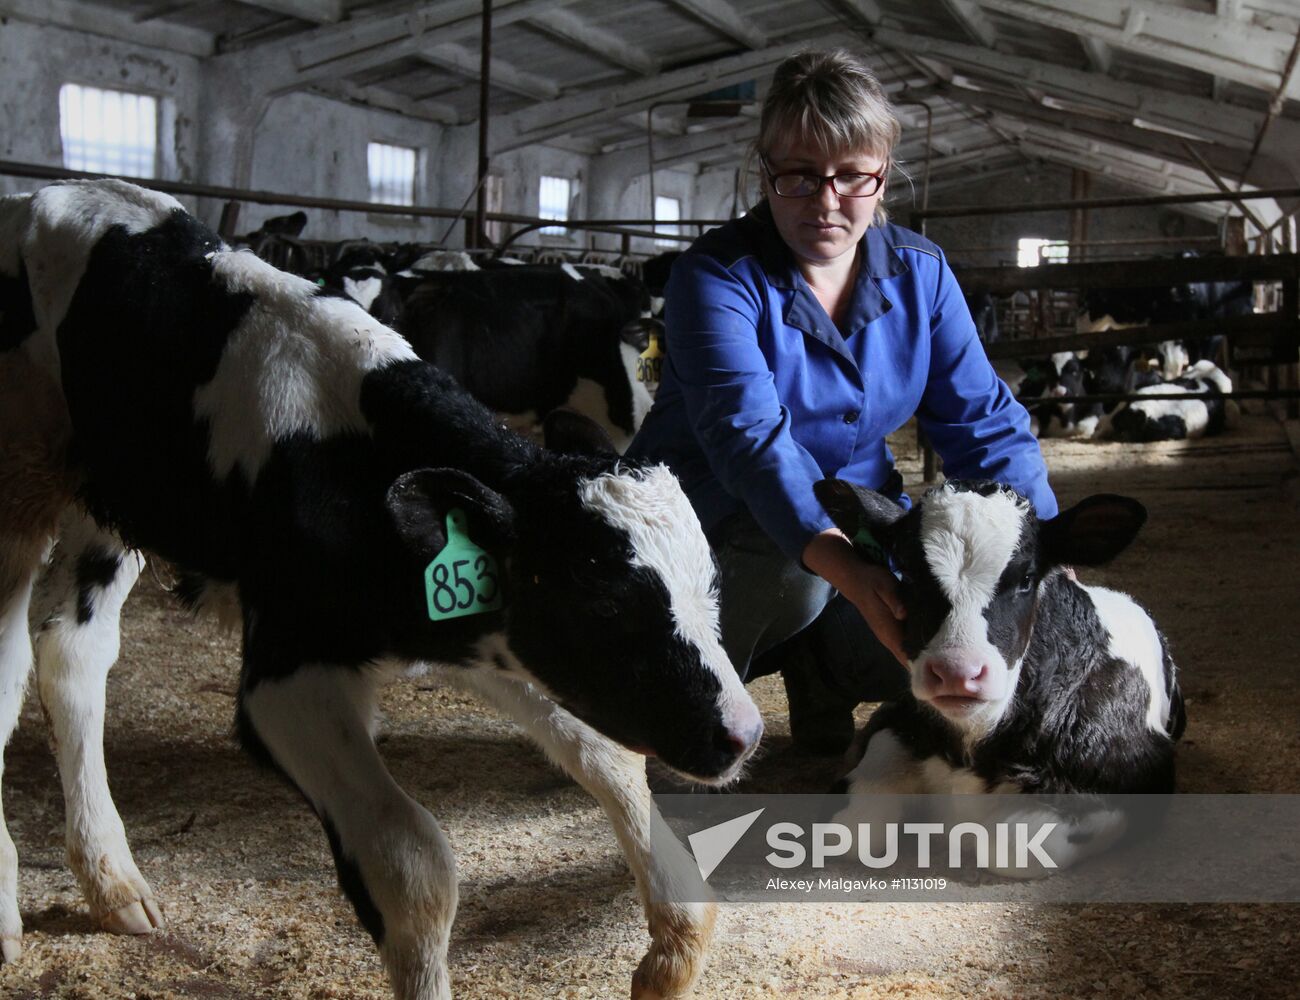 Veterinarian works at "Omsk" production farm